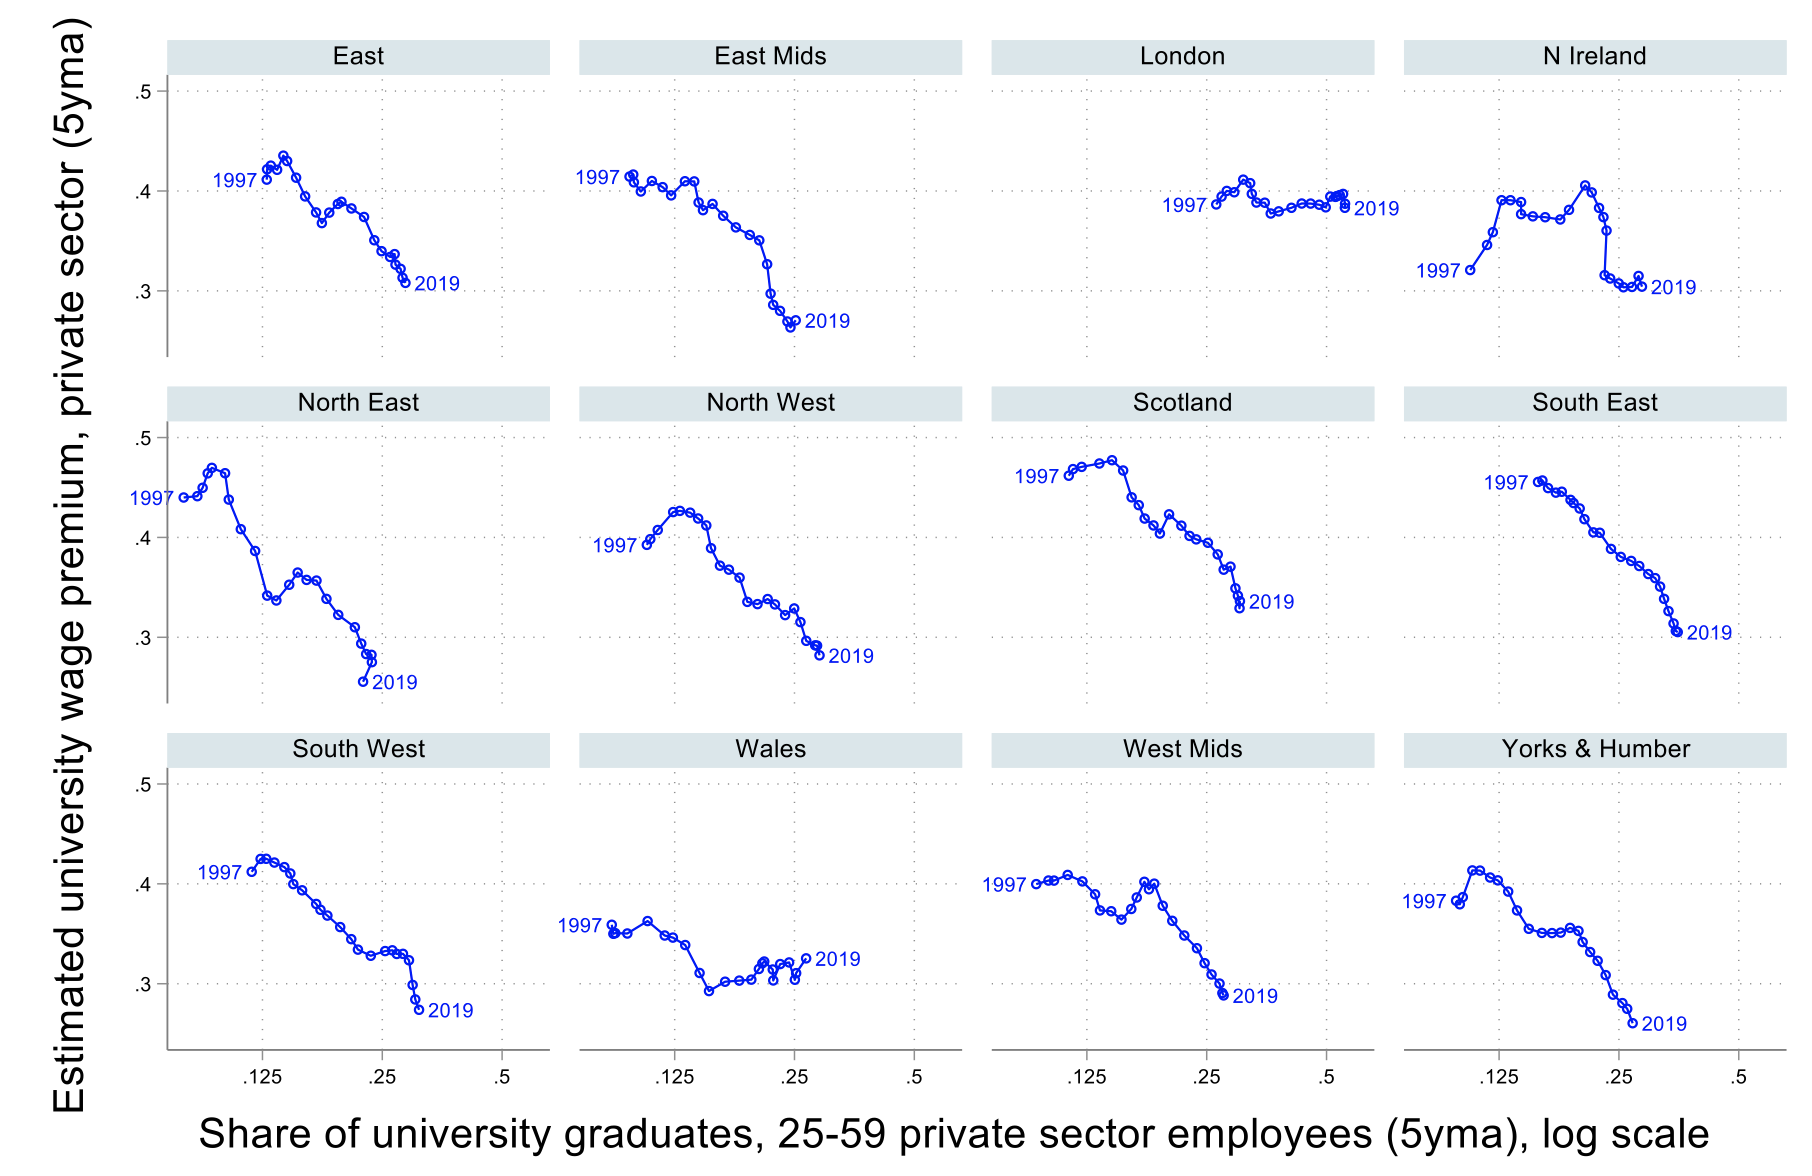 Figure 4  University wage premia have fallen in all regions outside London as university attainment has risen, suggesting that rising supply has outstripped demand for graduates